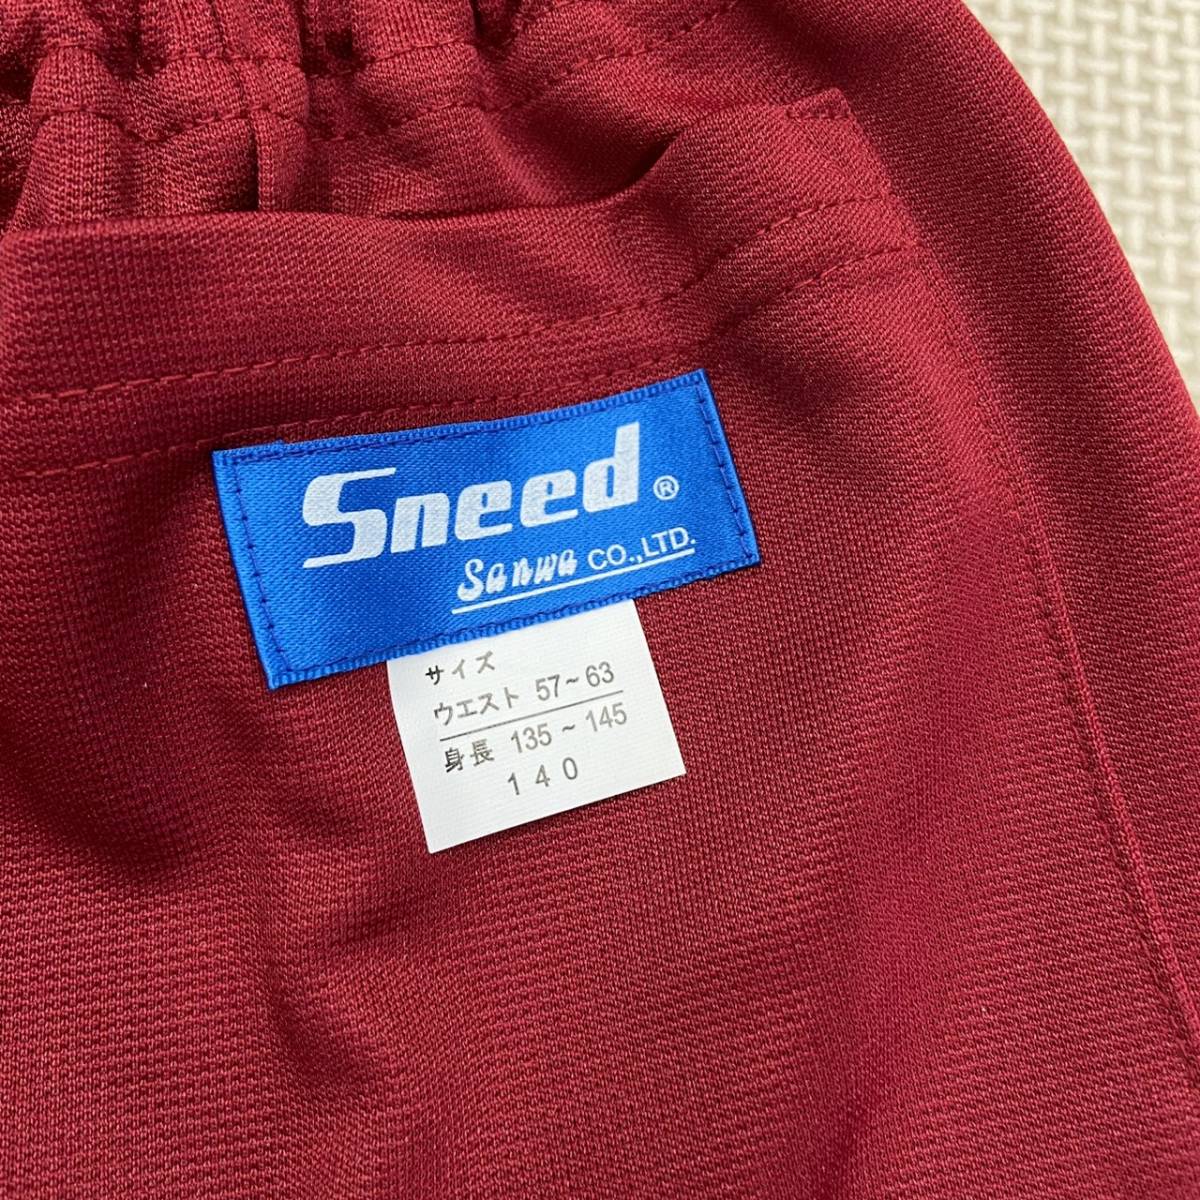 SS-RSP1404 new goods [Sneed Sanwa] sport wear short pants size 140 4 sheets / red / plain / front pocket / soft toy / display / small size 